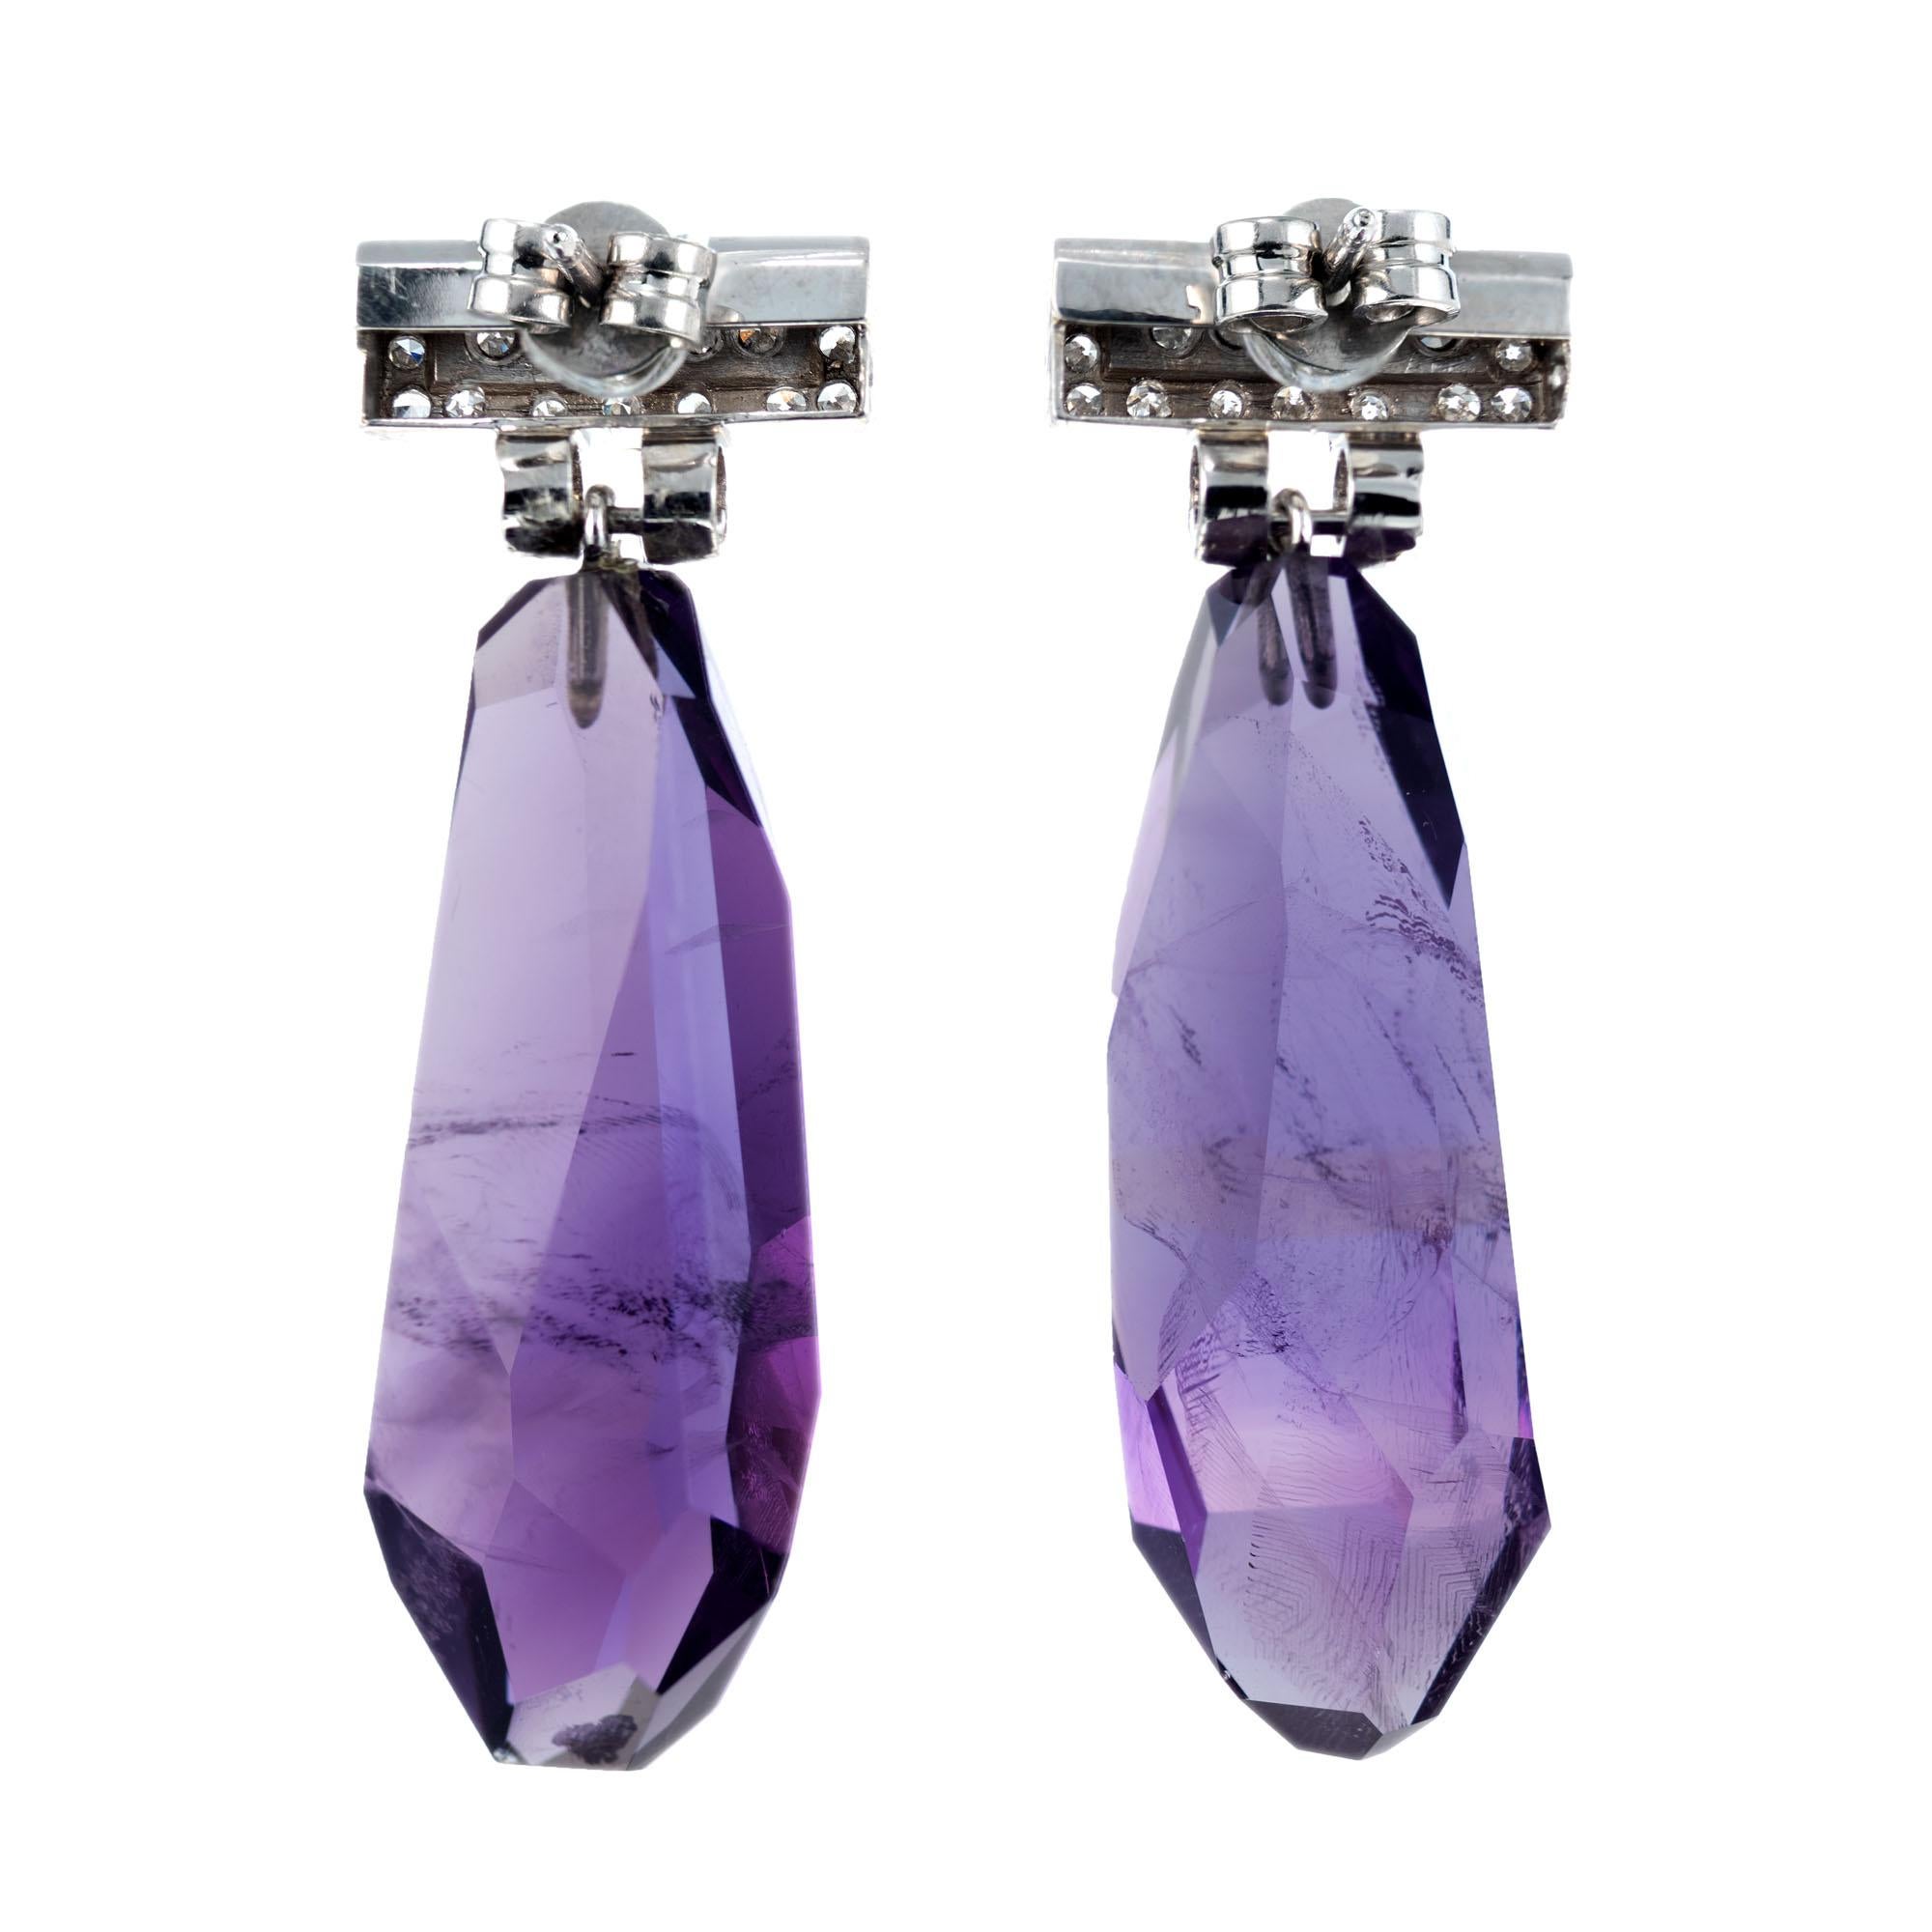 Natural 48.00 carat amethyst crystal dangle drop earrings. Set in platinum with 40 single cut accent diamonds. , approx. total weight 48.00cts. 

2 natural polished bright purple Amethyst crystals, approx. total weight 48.00cts, SI2 - I2, natural